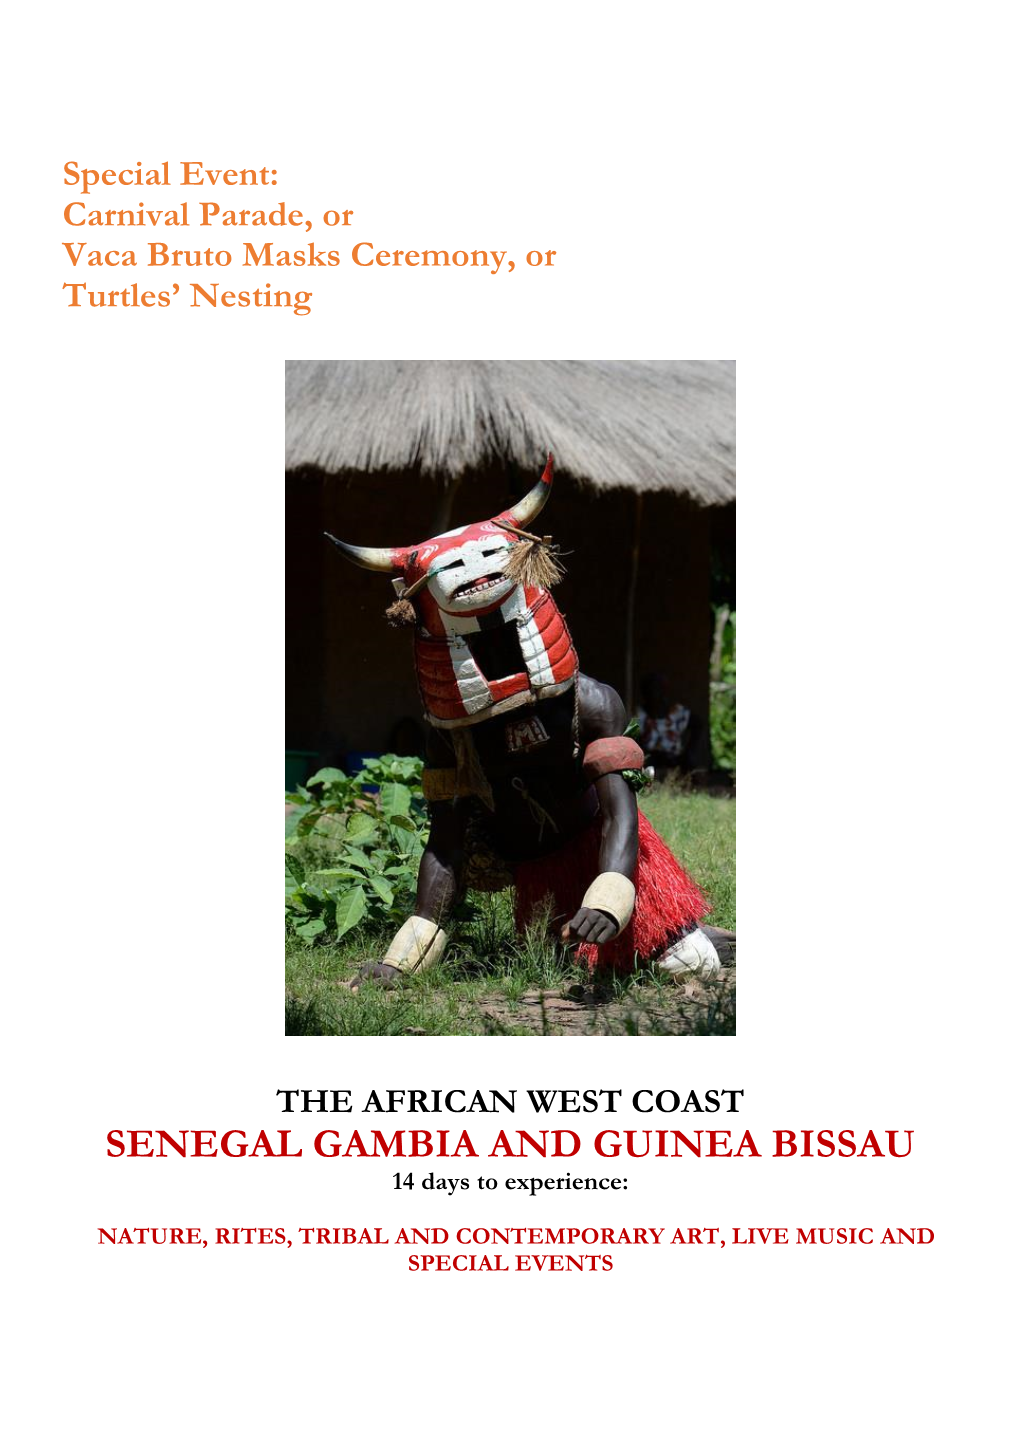 SENEGAL GAMBIA and GUINEA BISSAU 14 Days to Experience